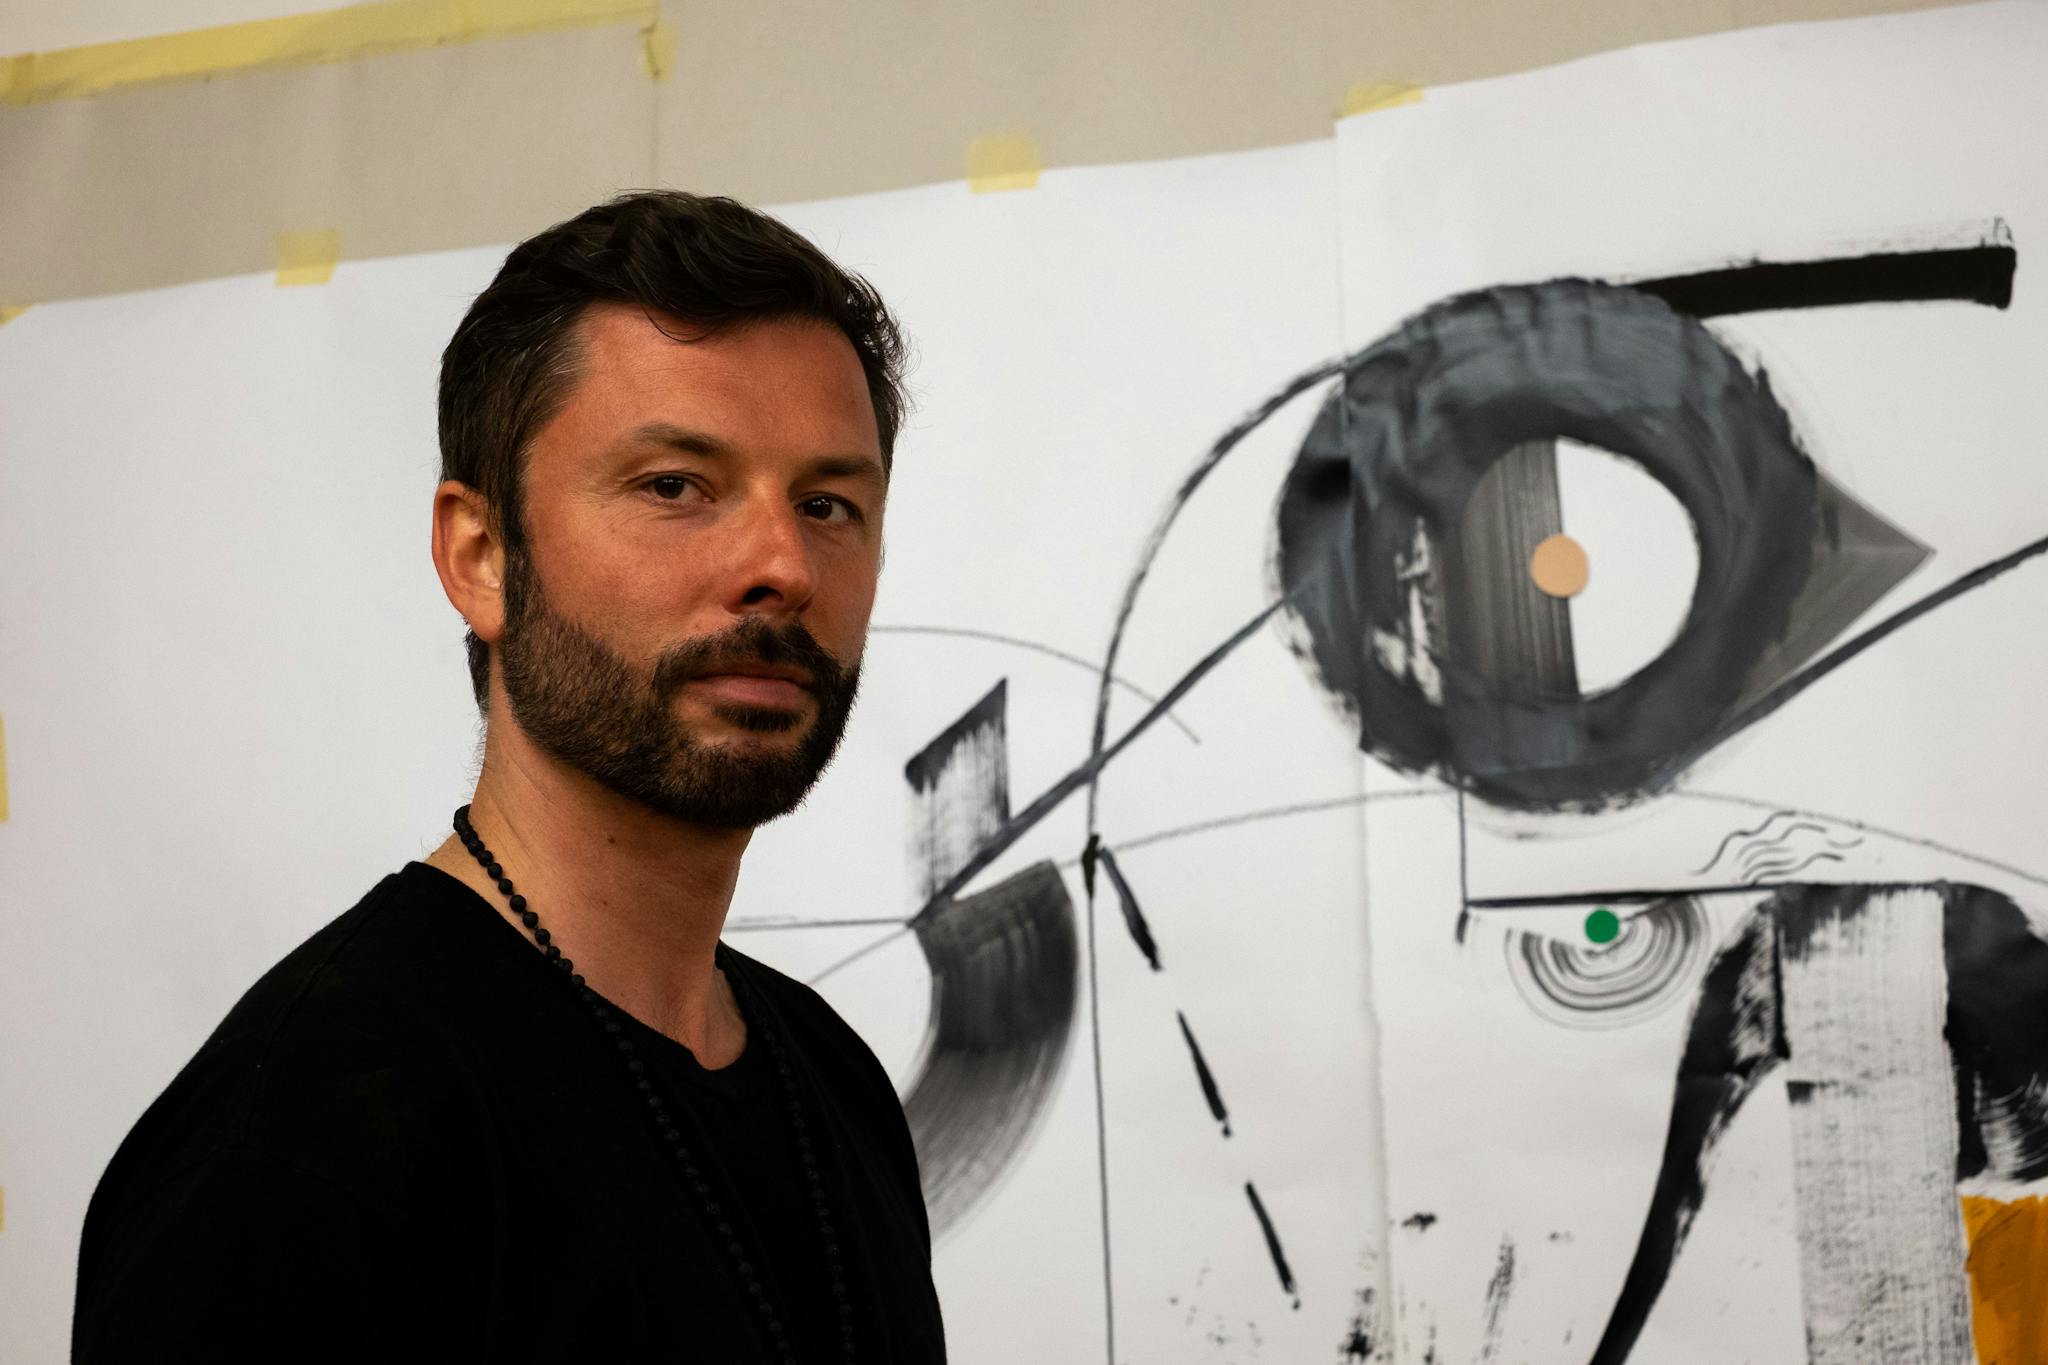 Tomek Sadurski is photographed in front of an abstract image featuring black designs.